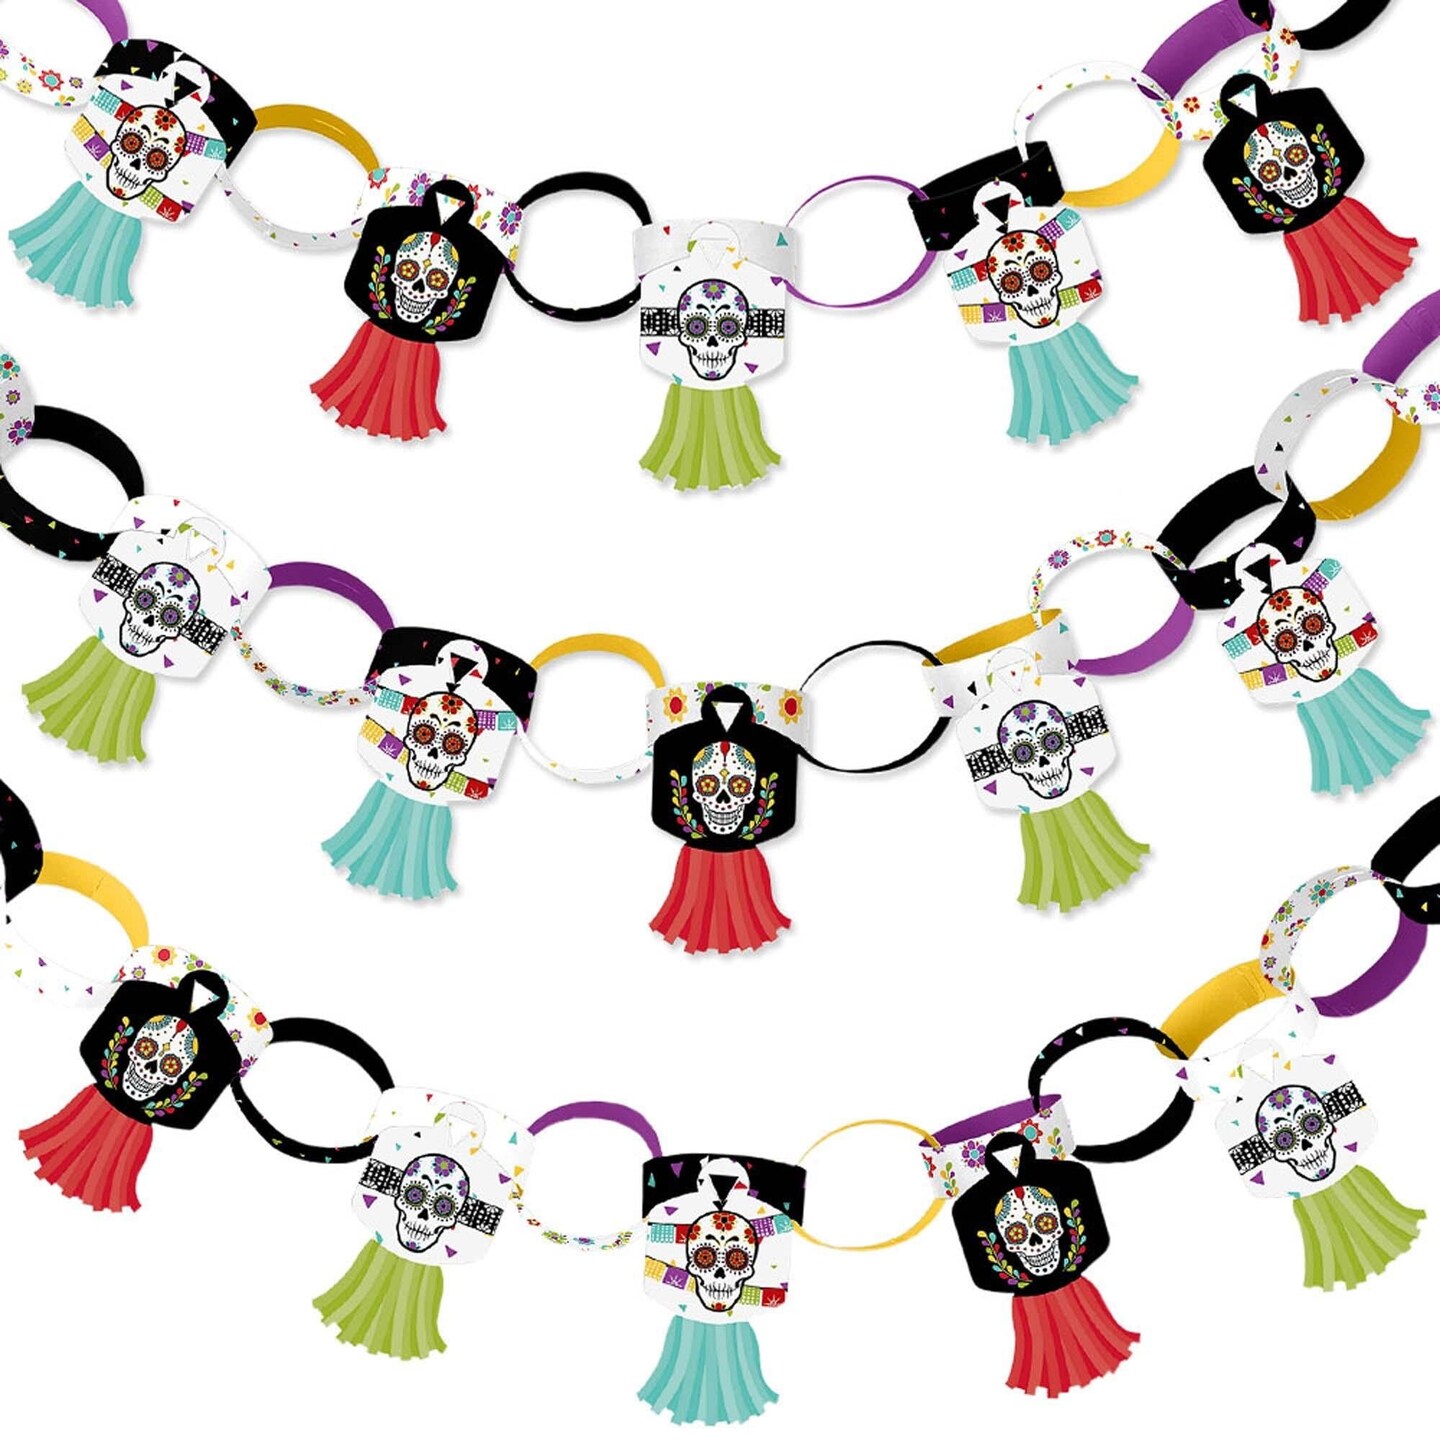 Big Dot of Happiness Day of the Dead - 90 Chain Links and 30 Paper Tassels Decoration Kit - Sugar Skull Party Paper Chains Garland - 21 feet